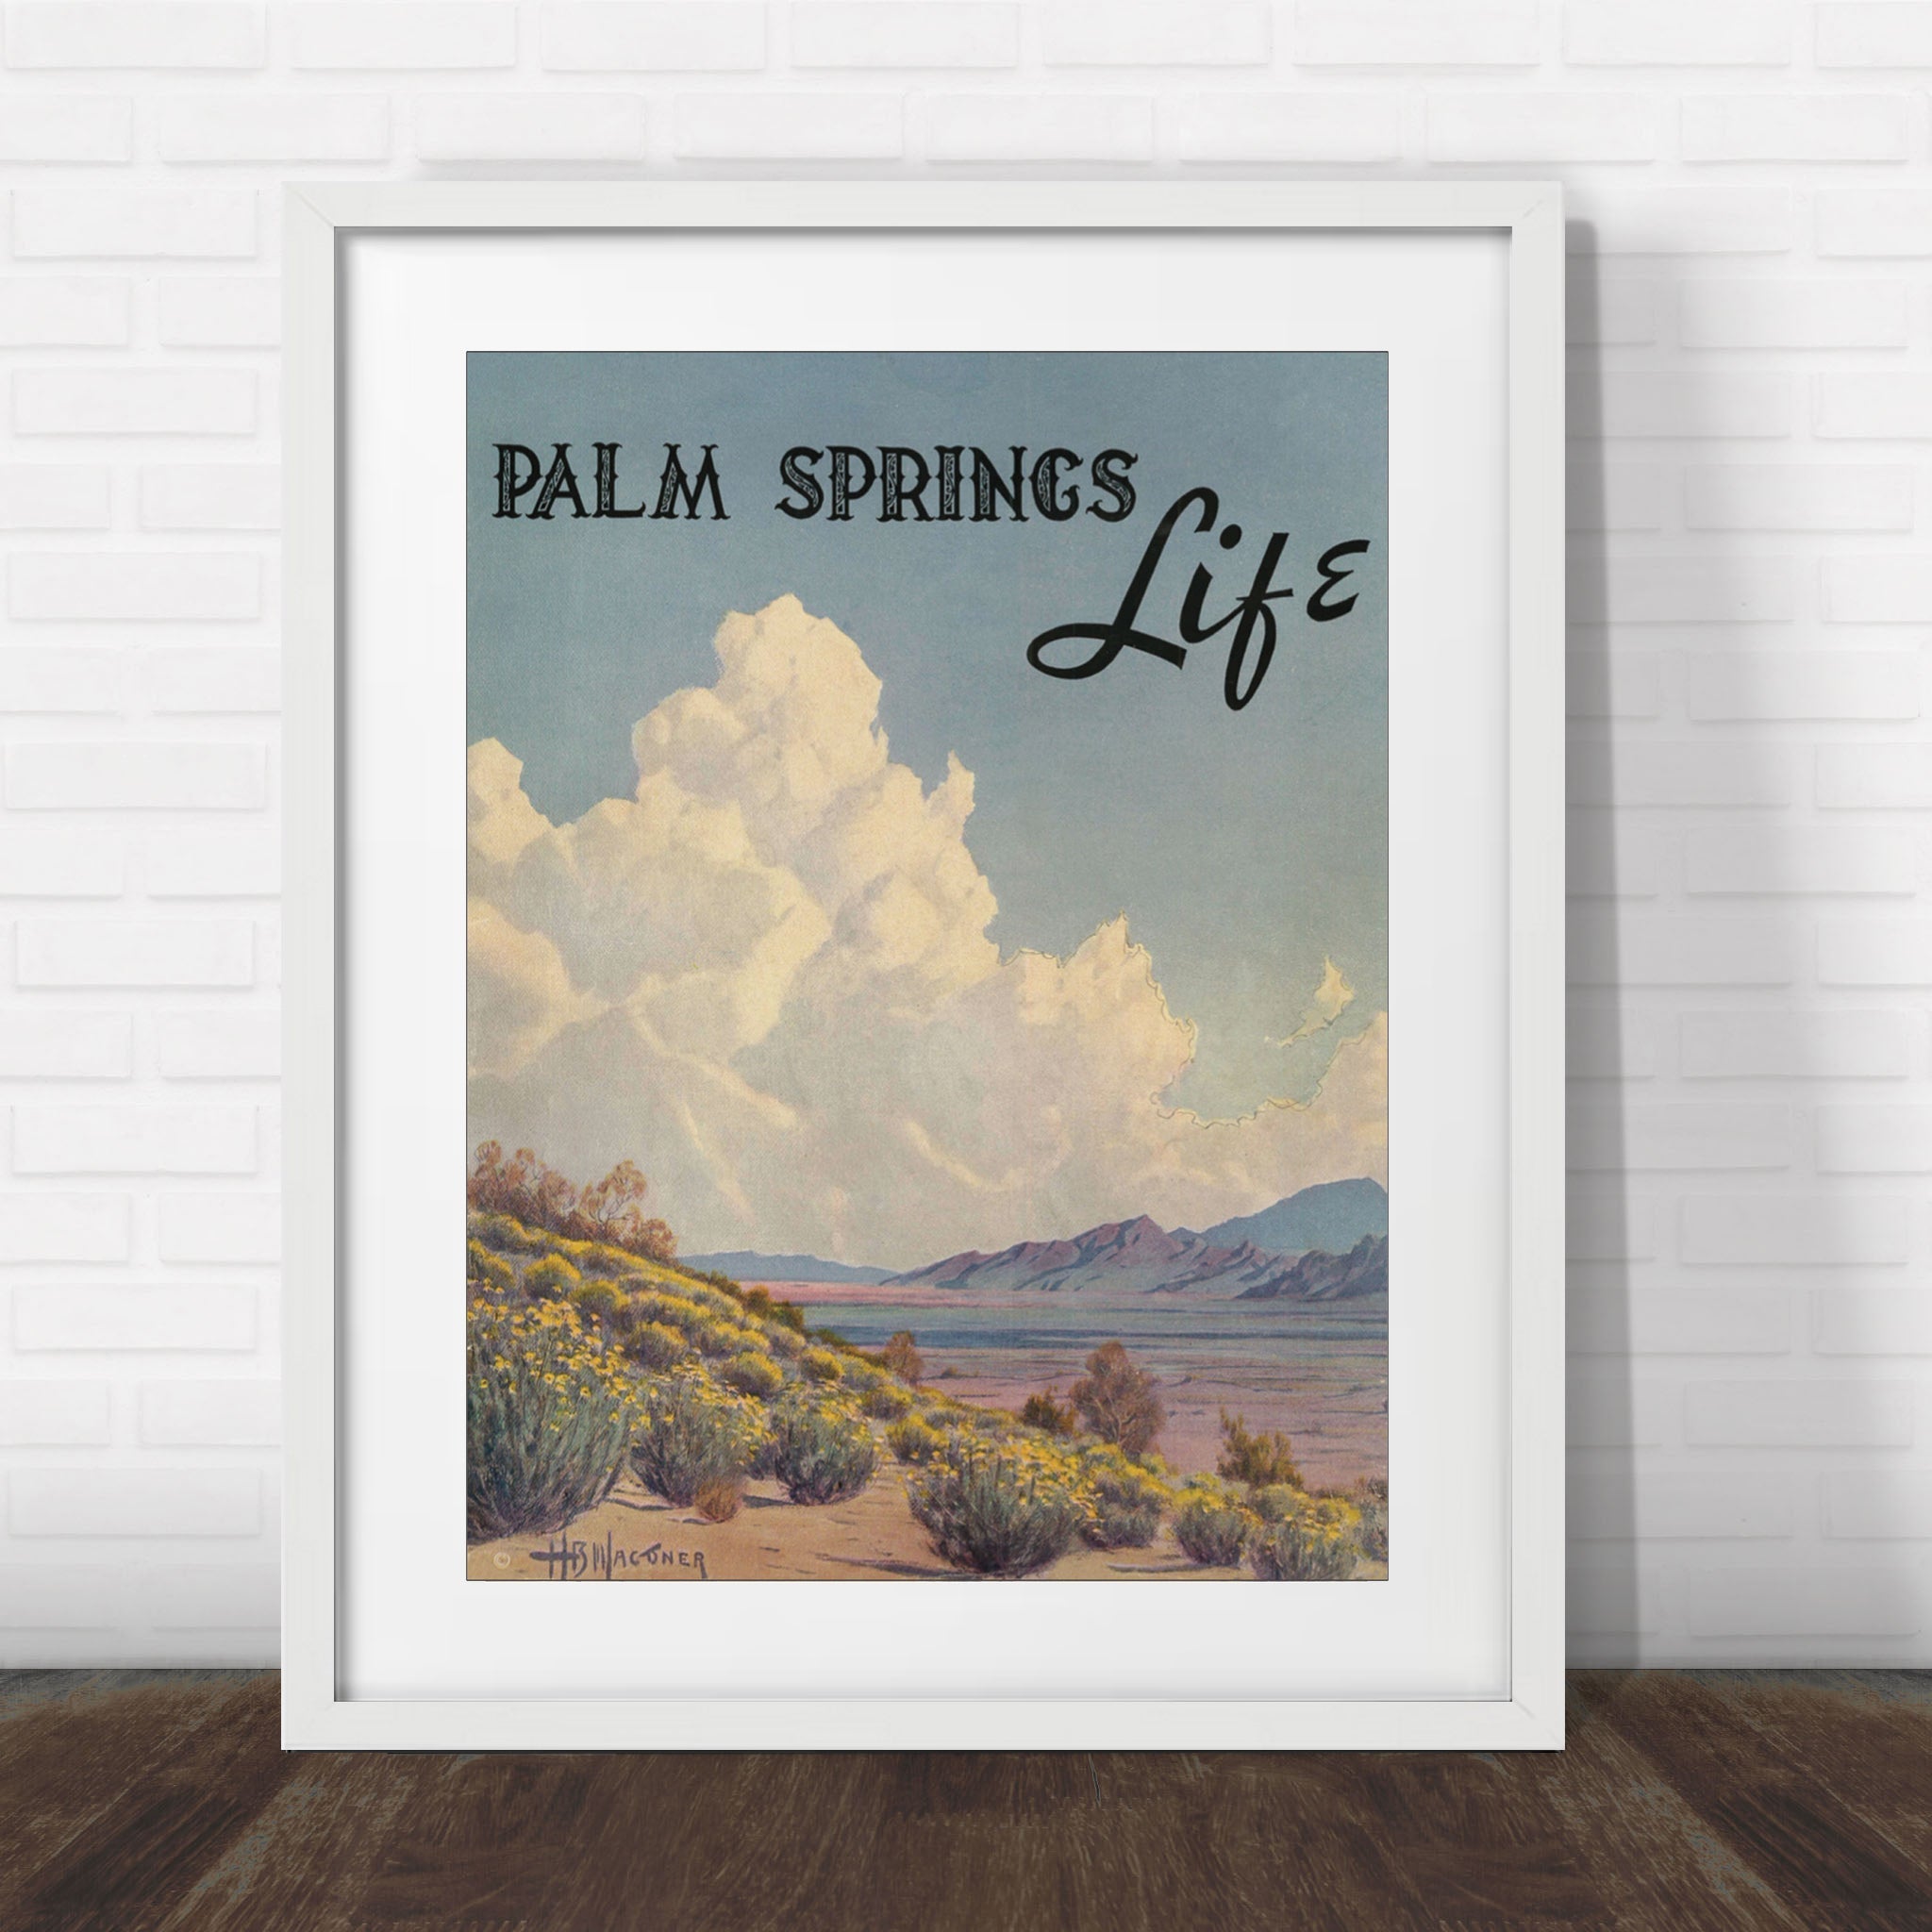 Palm Springs Life 1931 - Cover Poster